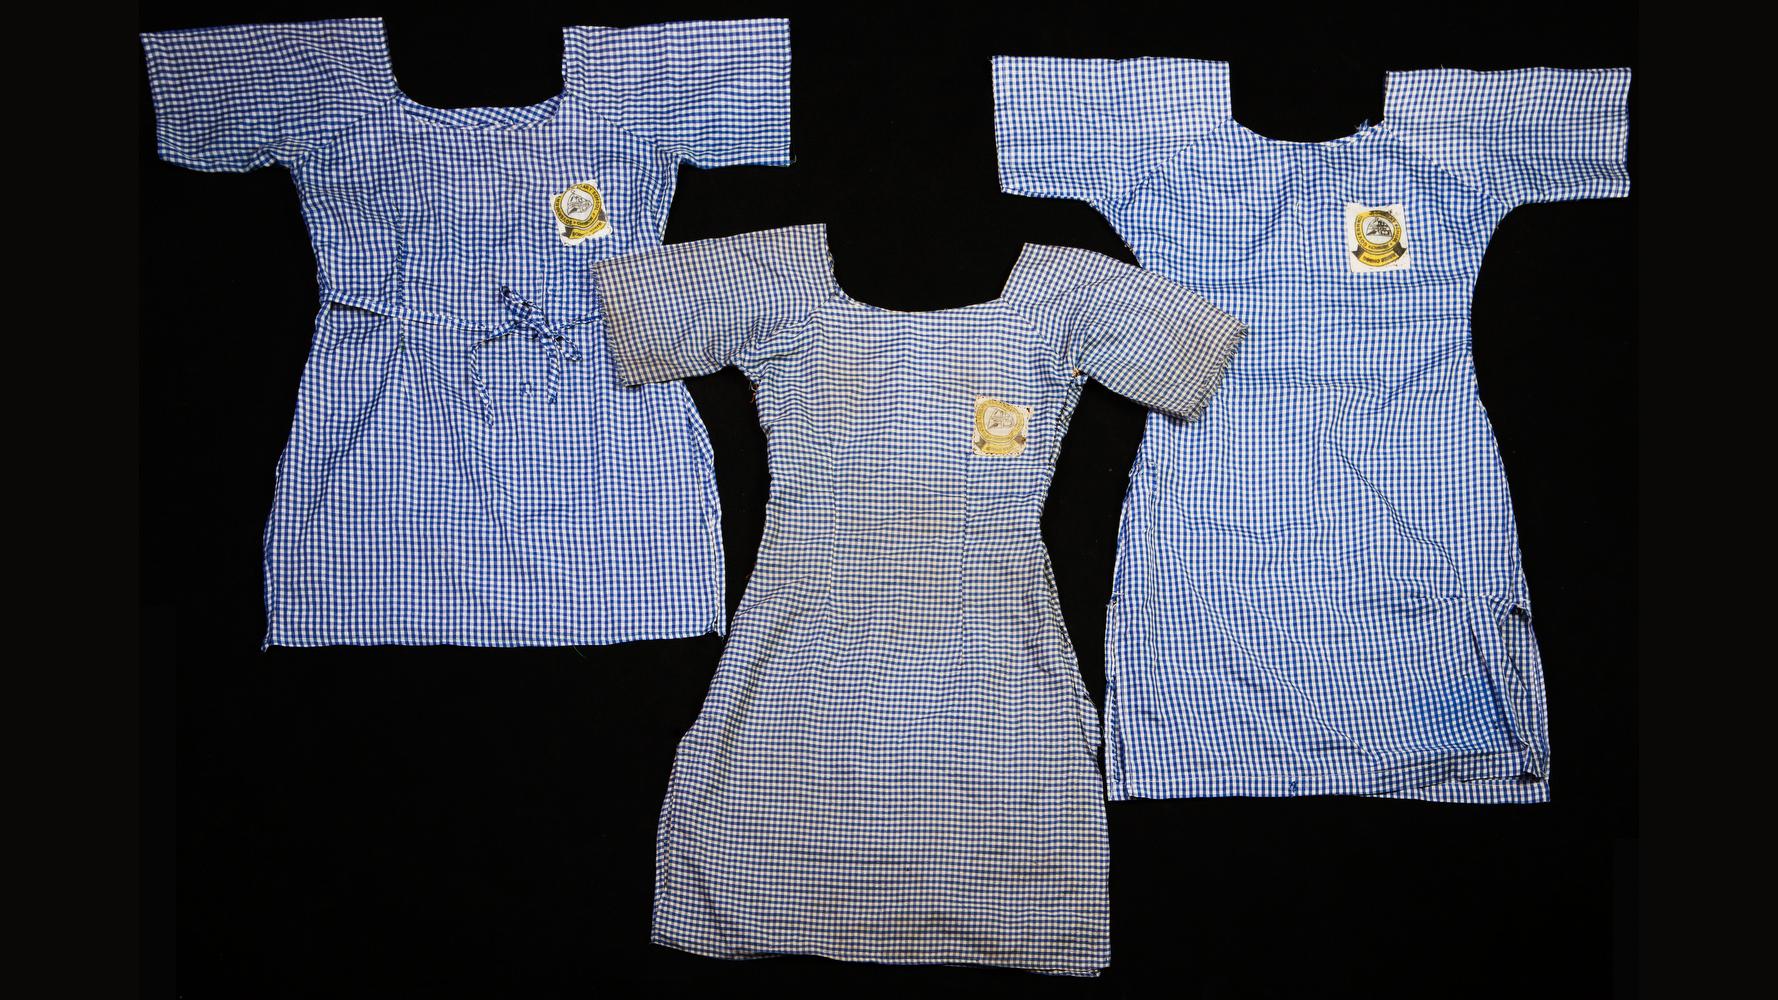 Chibok girl's school uniforms from three of the kidnapped girls.